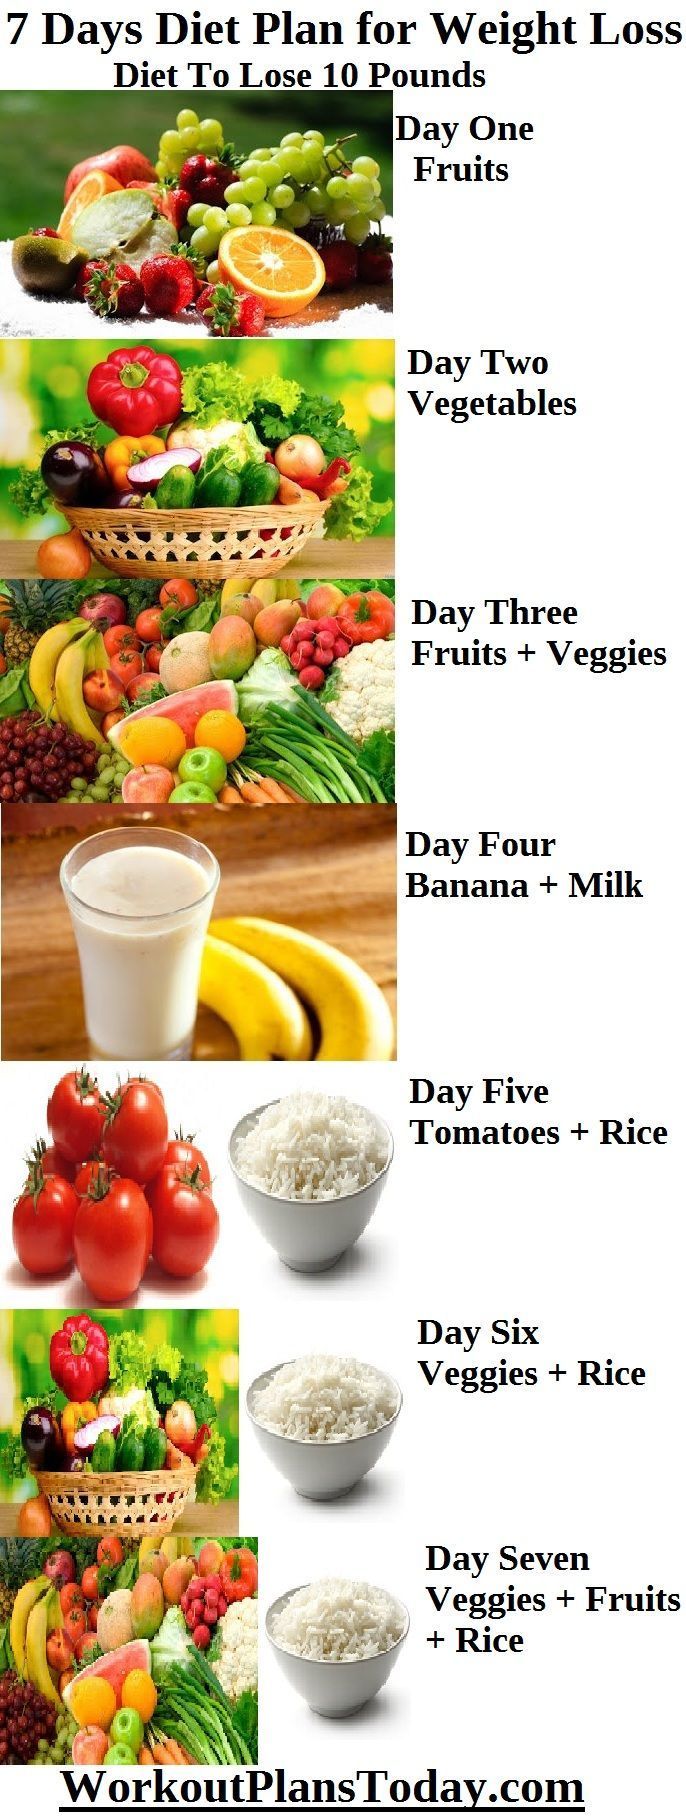 7 Days Diet Plan for Weight Loss - Diet To Lose 10 Pounds Day -   22 only fruit diet
 ideas